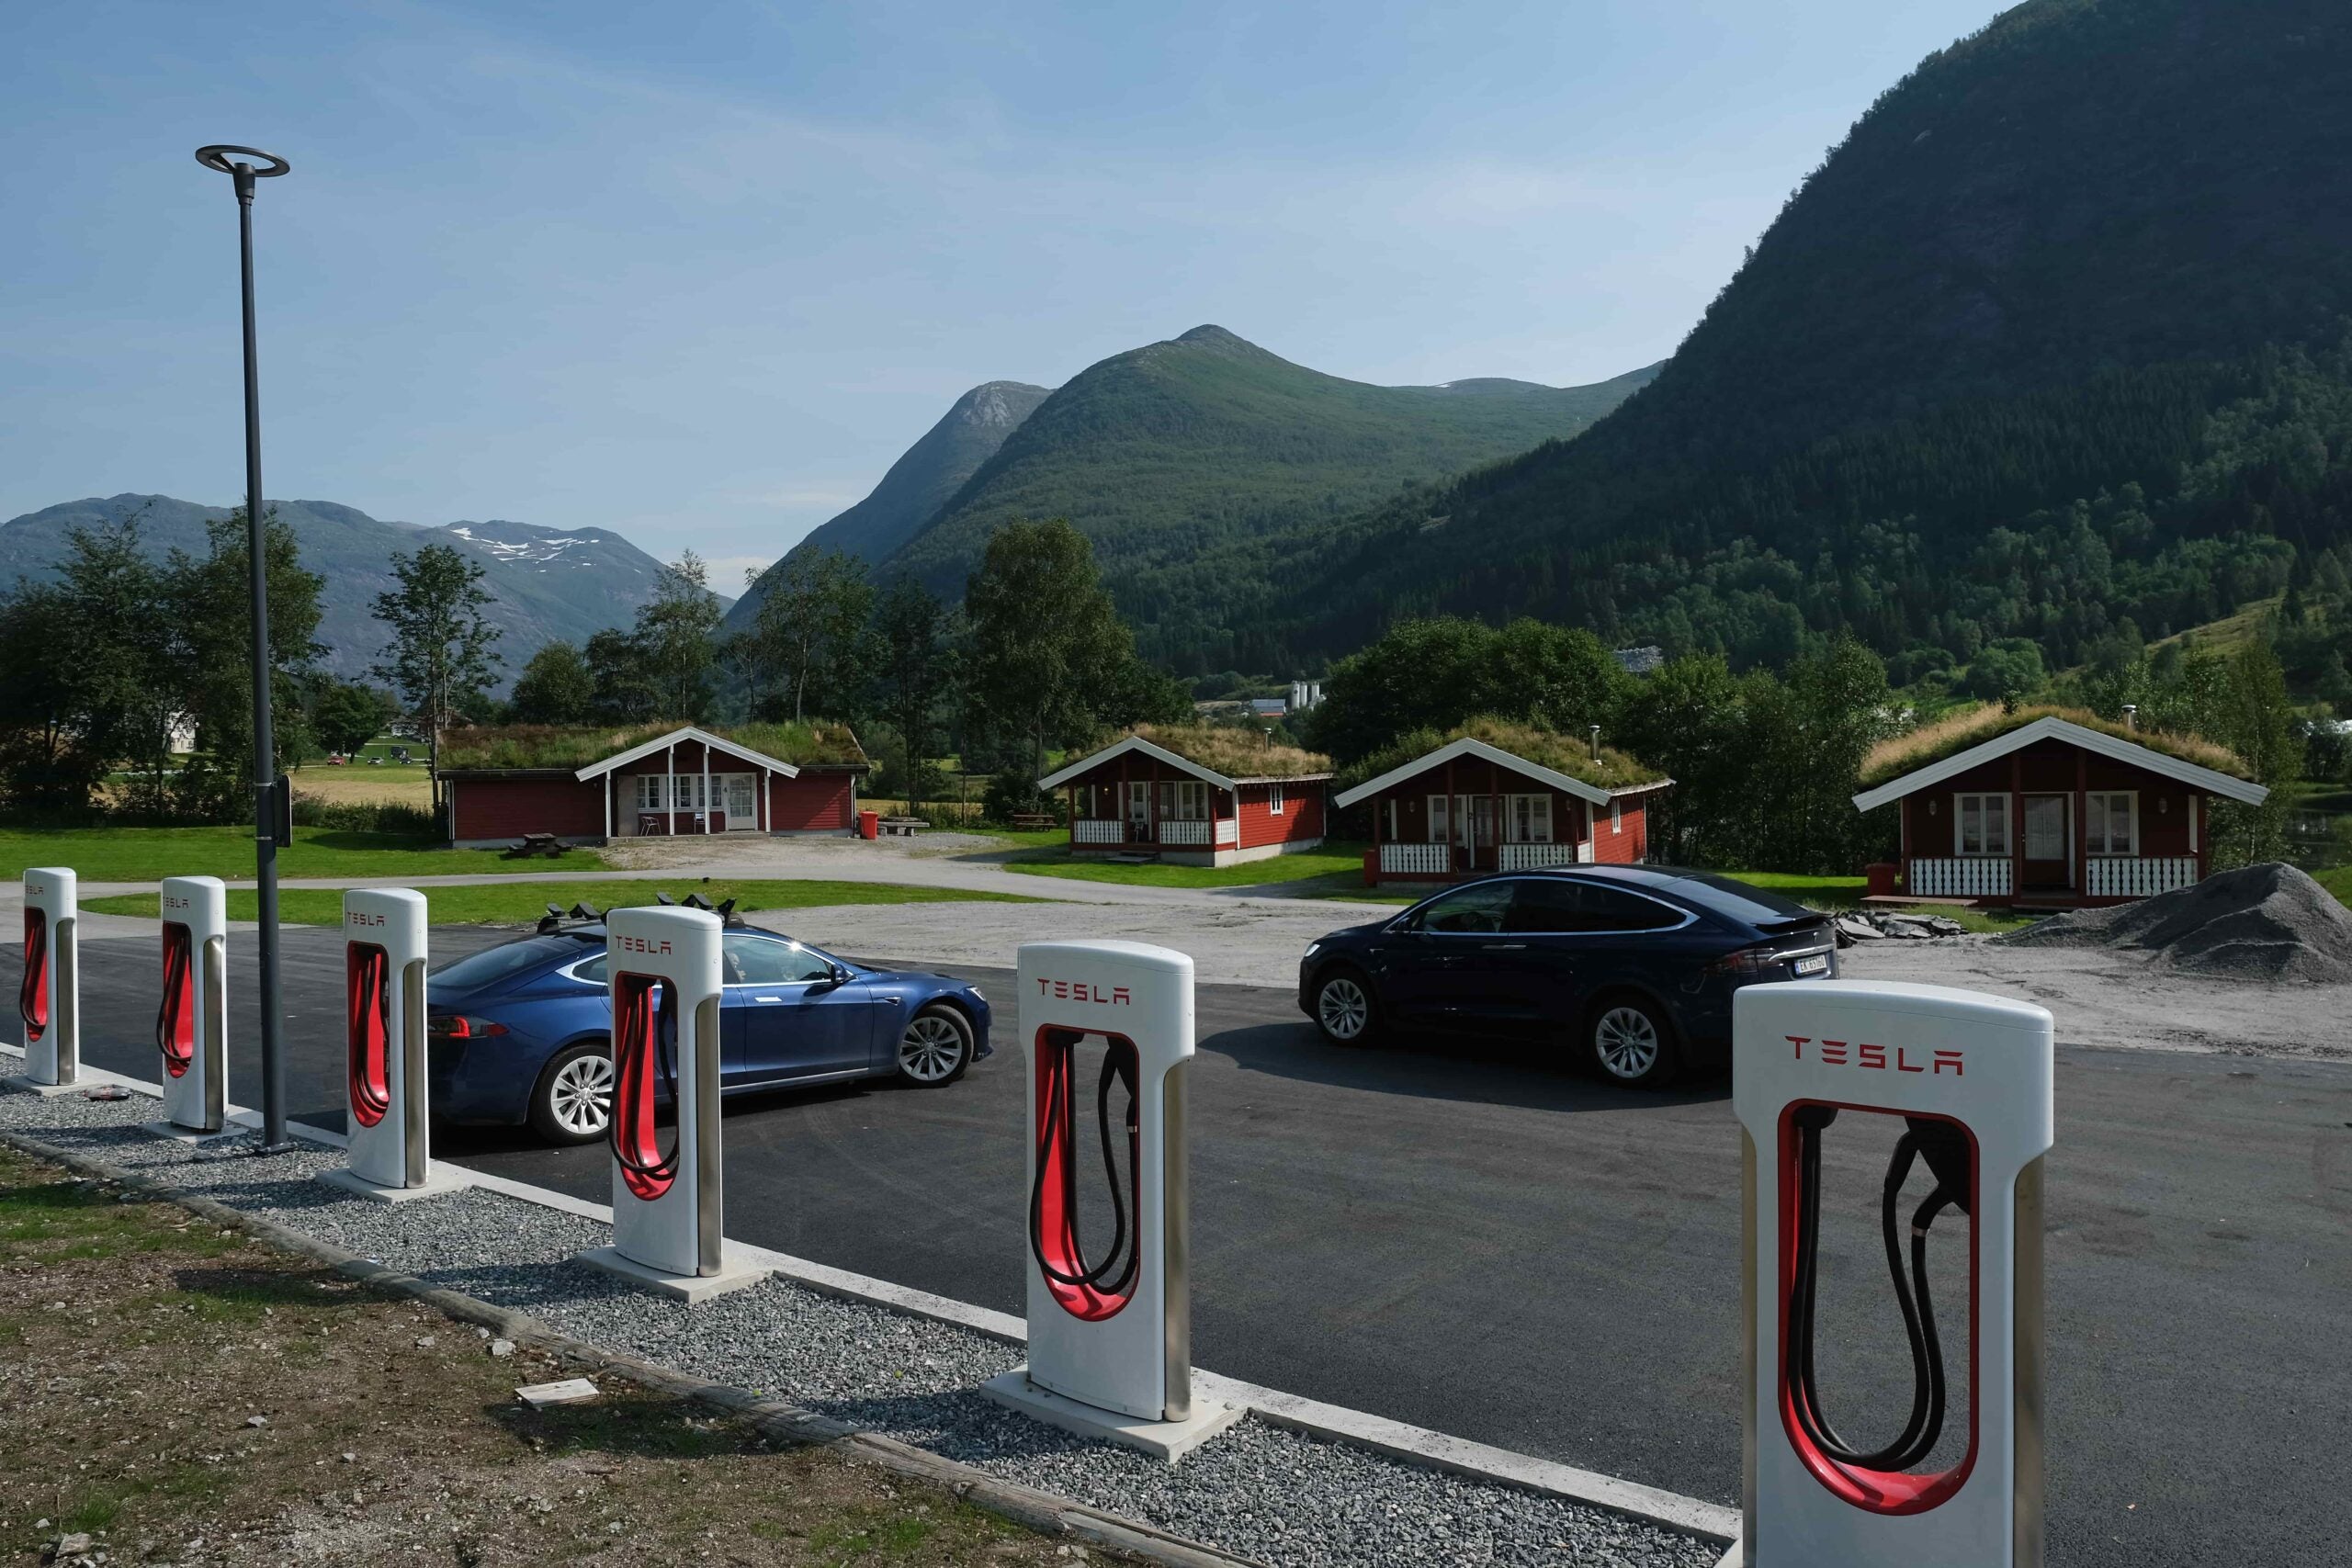 Can a booming start-up scene help Norway turn its back on oil’s “poisoned pill”?